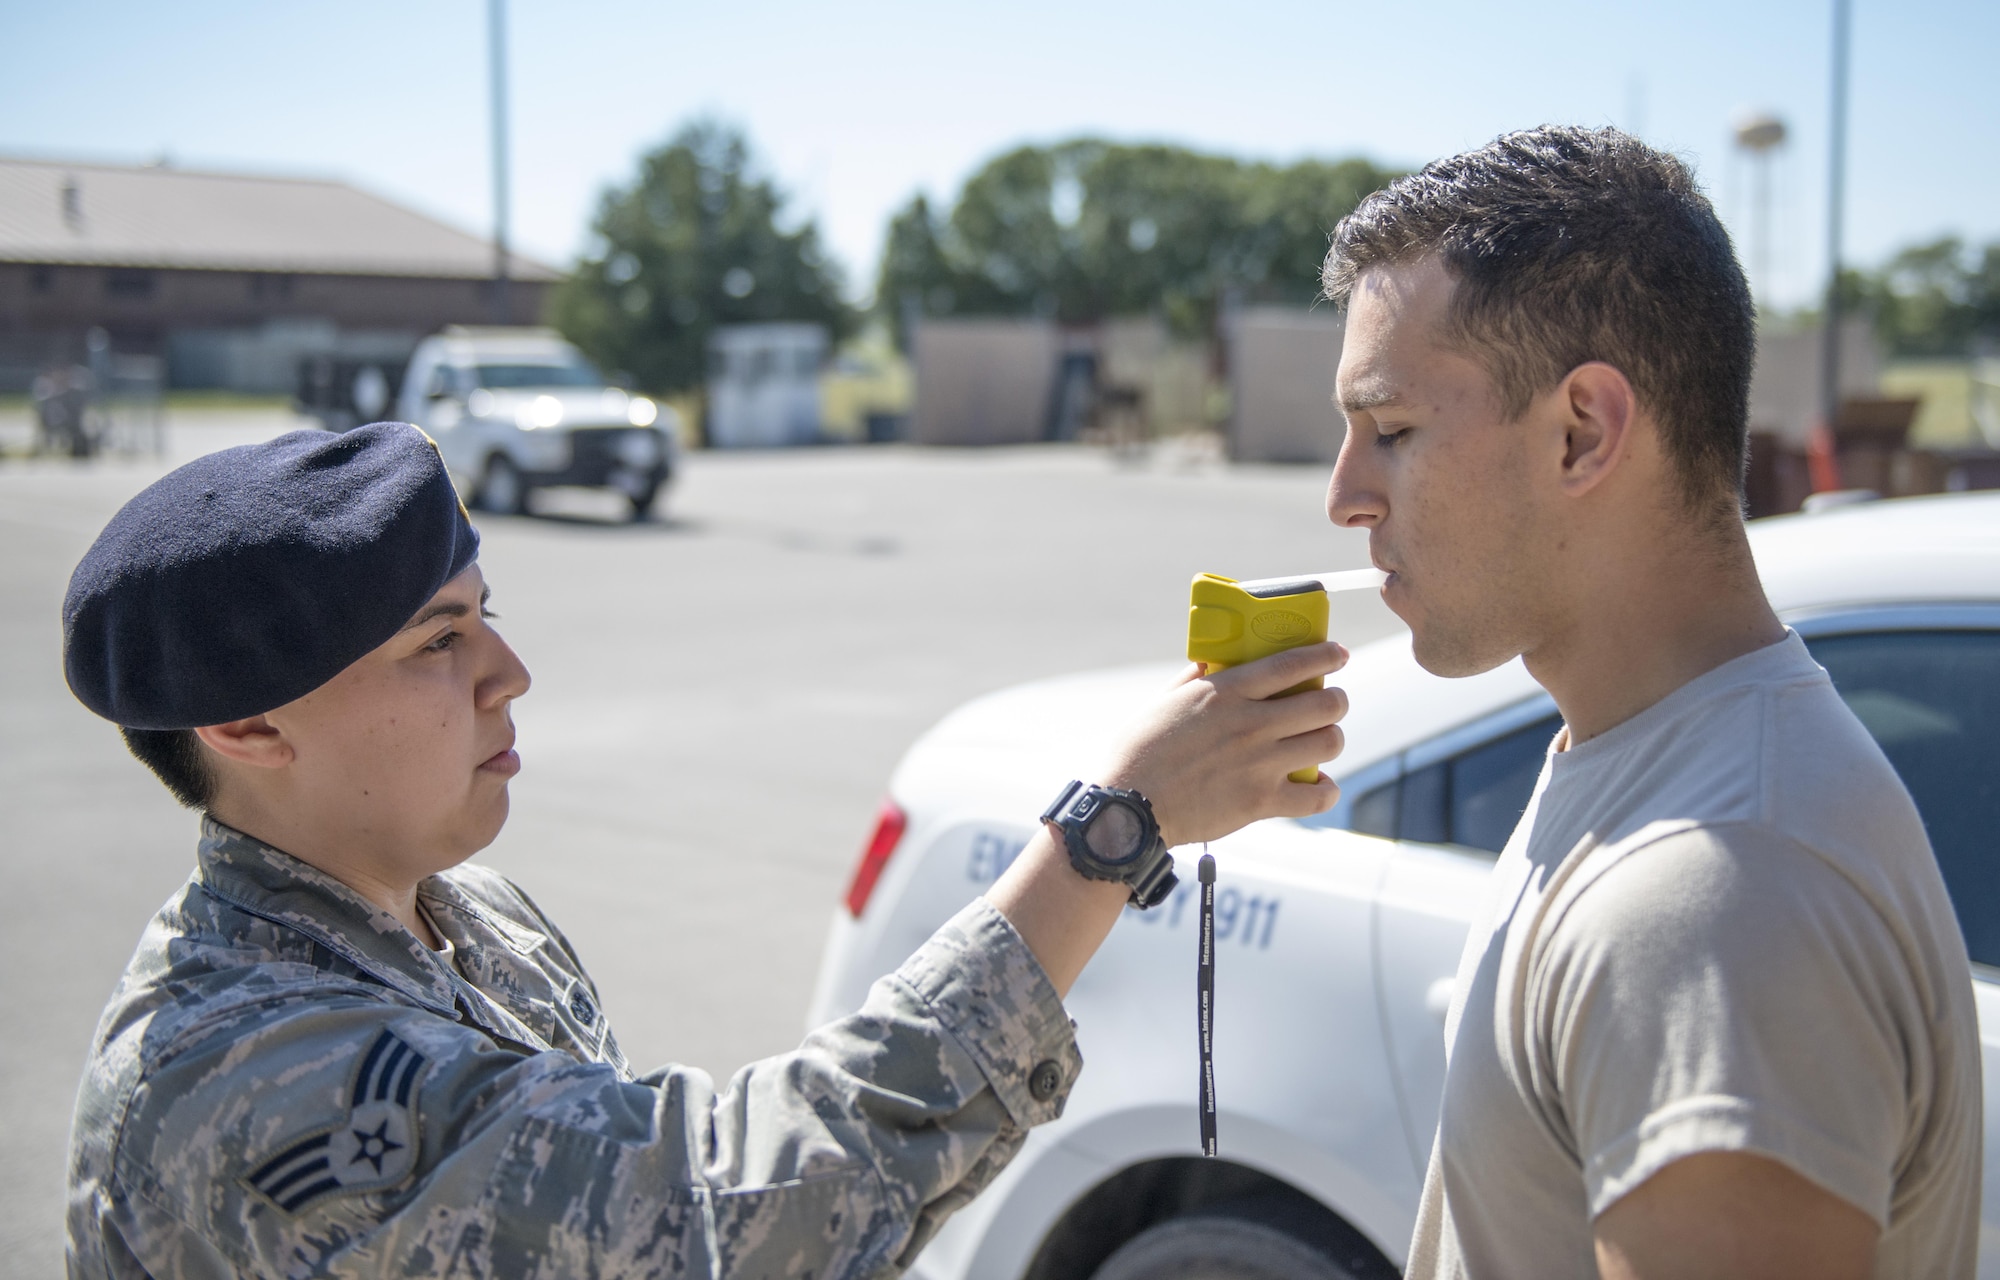 U.S. Air Force Senior Airman Rylynn Paz, the 509th Security Forces Squadron (SFS) assistant NCO in charge of police services and corrections, left, demonstrates the proper use of a portable breathalyzer test (PBT) with Airman 1st Class John Cabral, 509th SFS member, at Whiteman Air Force Base, Mo.,  Sept. 30, 2016. PBTs, used by SFS to check drivers’ blood alcohol content, are one of several tools used by SFS members to determine if drivers have been driving under the influence of alcohol. (U.S. Air Force photo by 1st Lt. Matthew Van Wagenen)